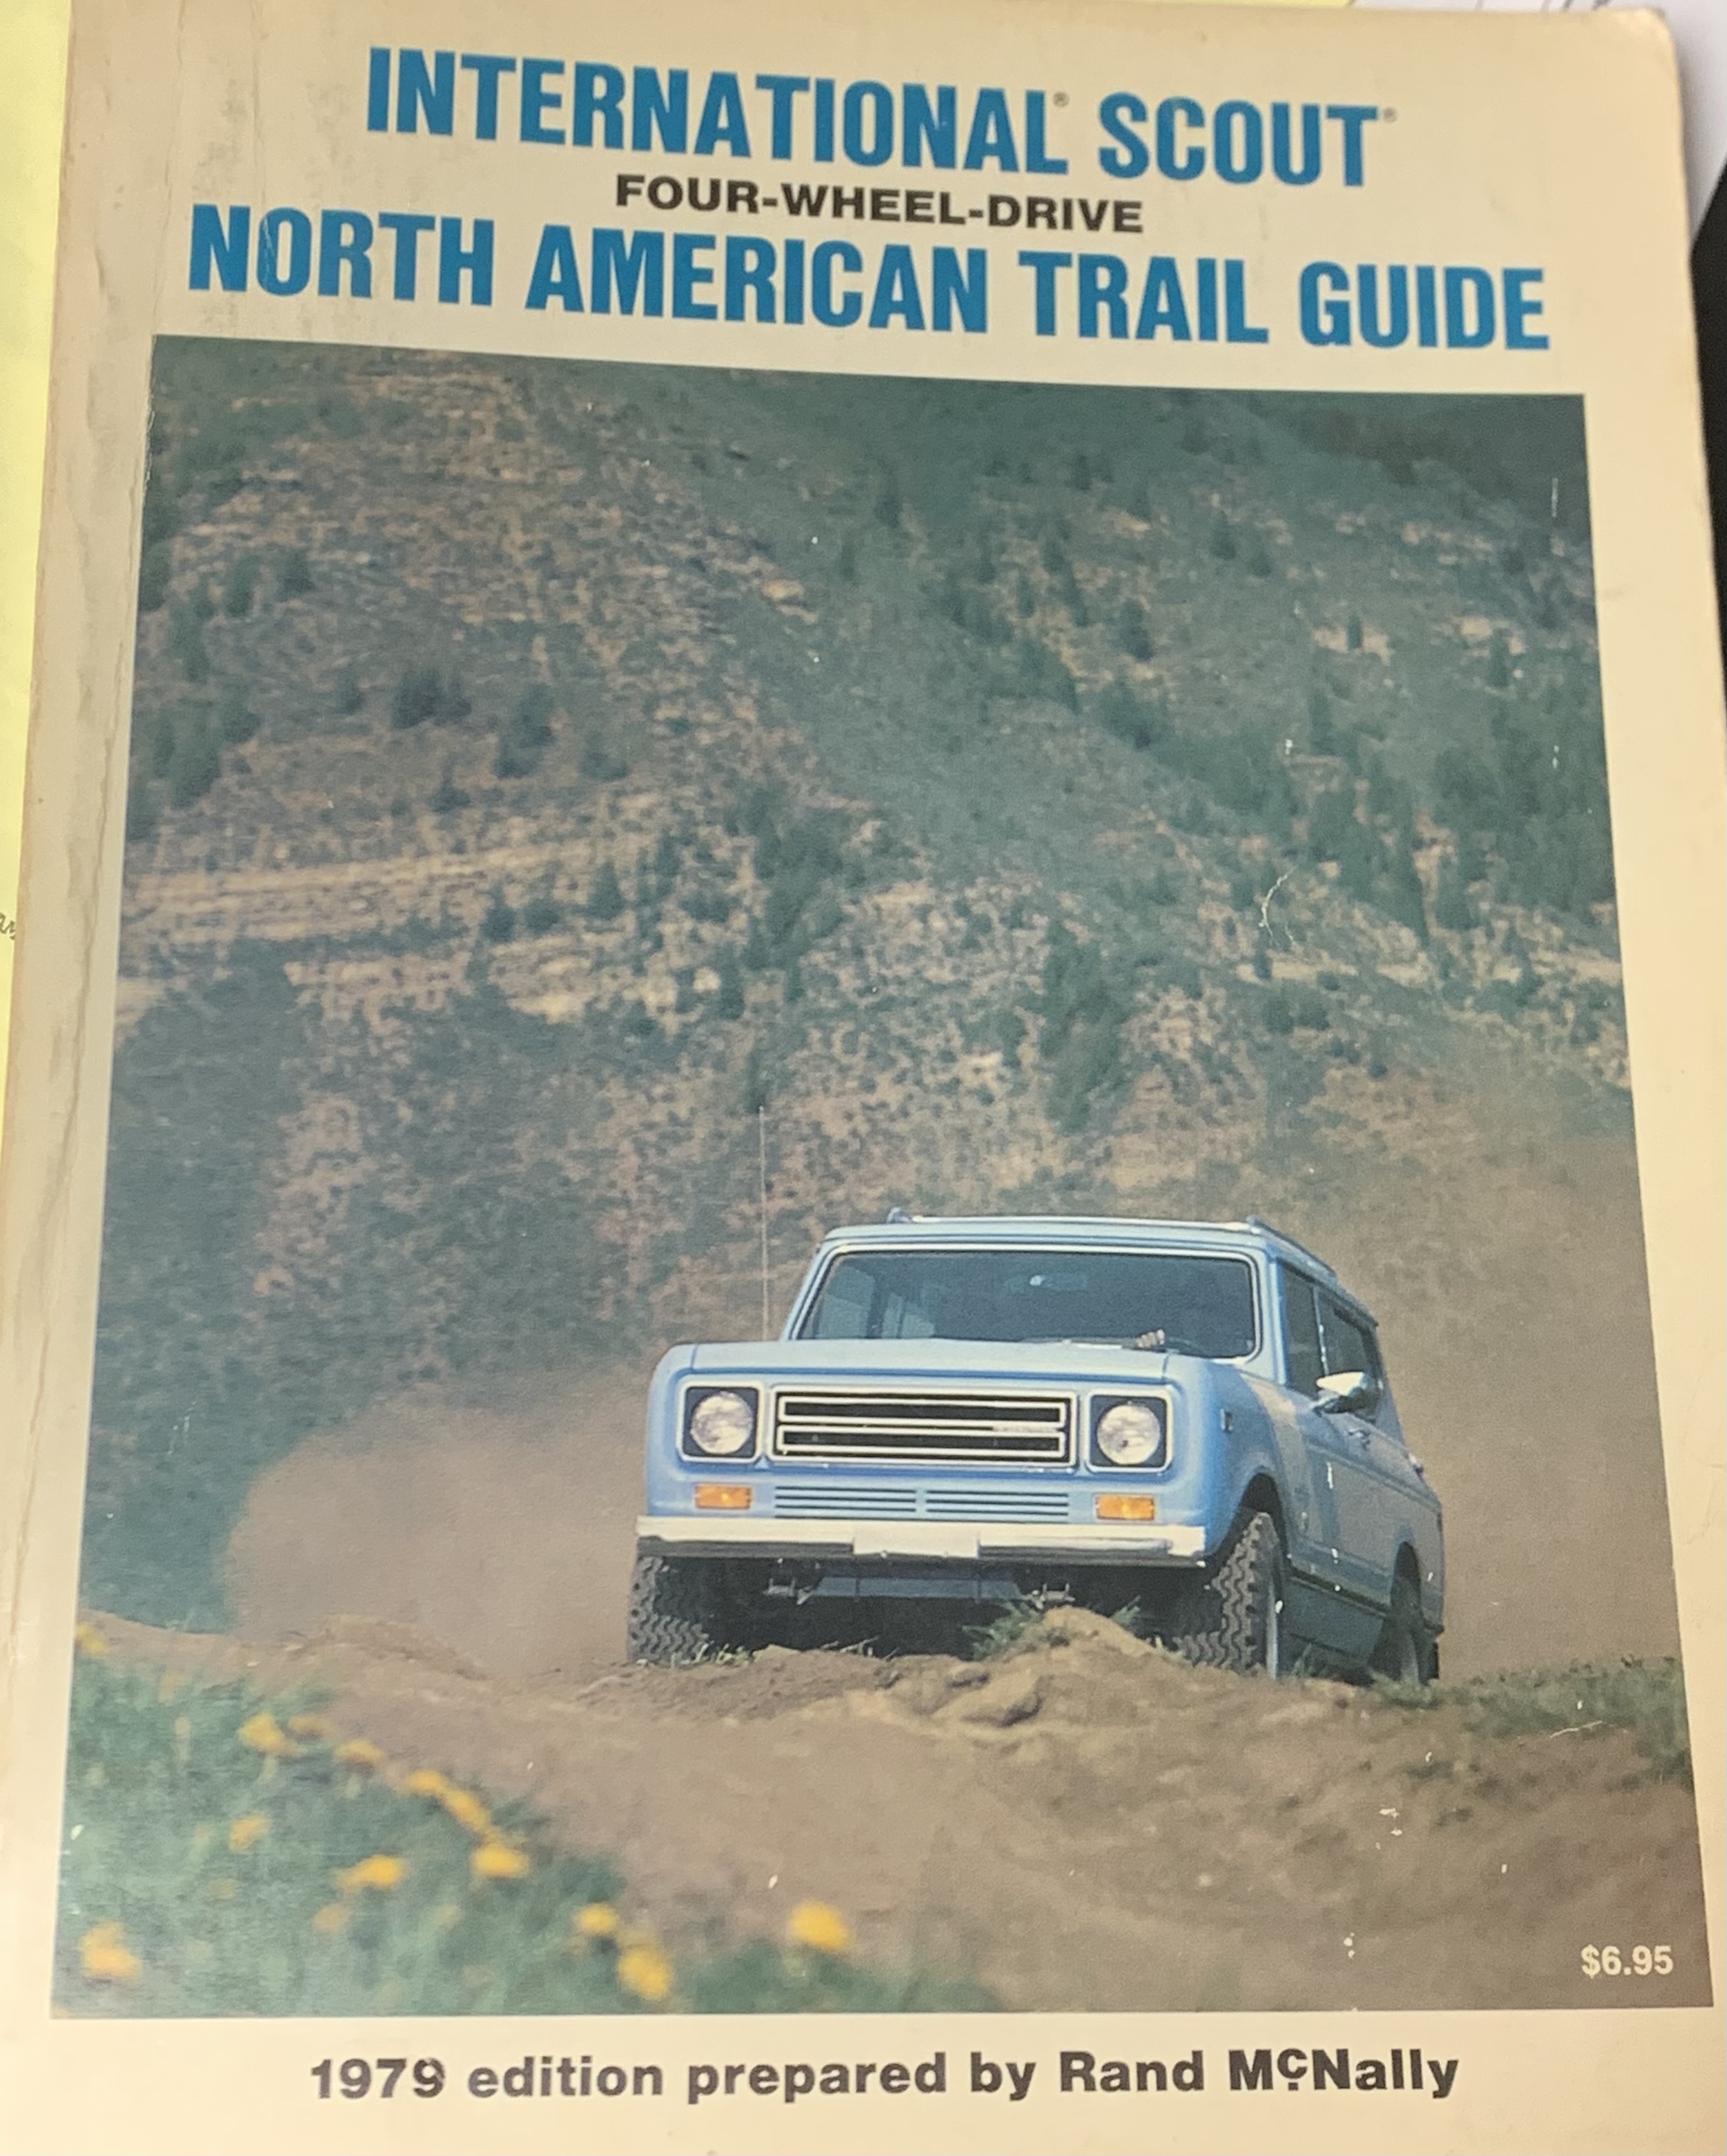 Scout II, Scout 80, Scout 800 International Scout Four-Wheel Drive North American Trail Guide